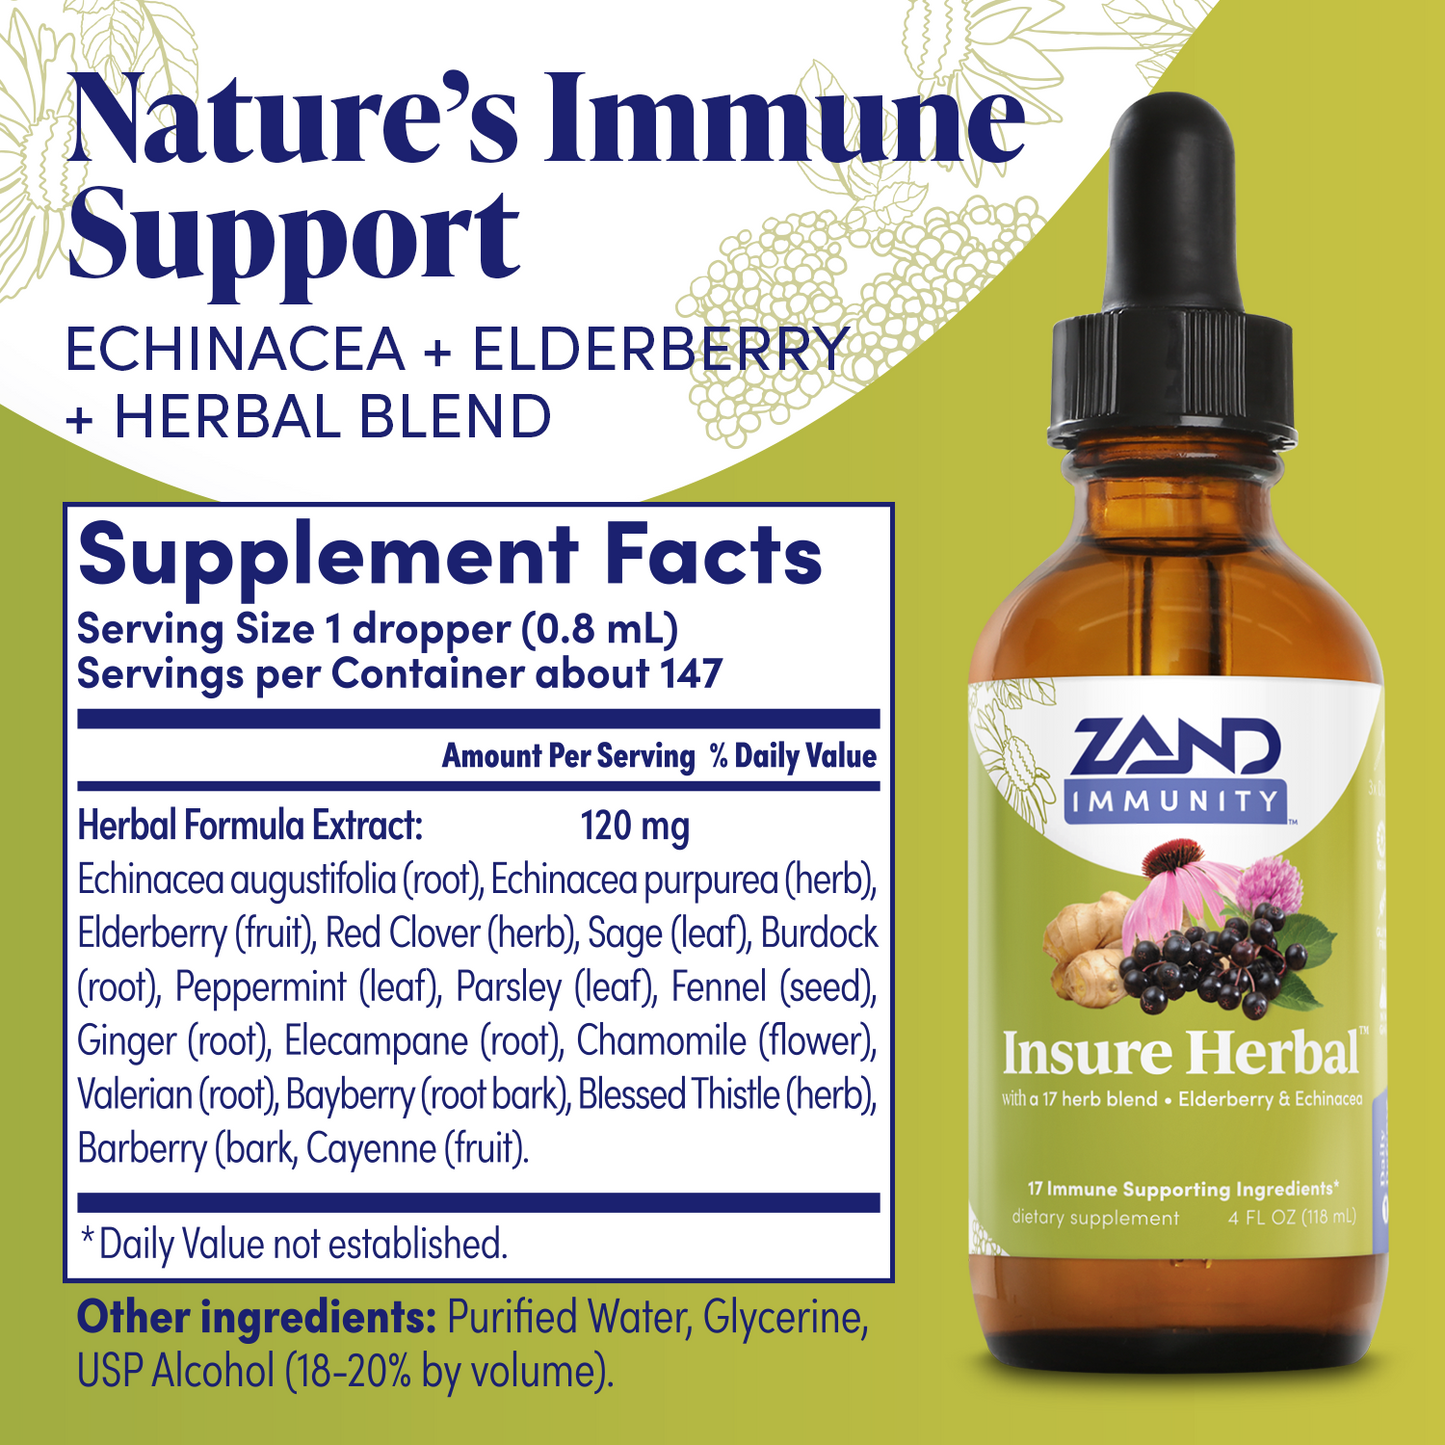 Zand Insure Immune Support, Herbal Liquid Echinacea Supplement, Features Goldenseal, Chamomile, Ginger & Valerian 4 oz (4 Ounce (Pack of 1))